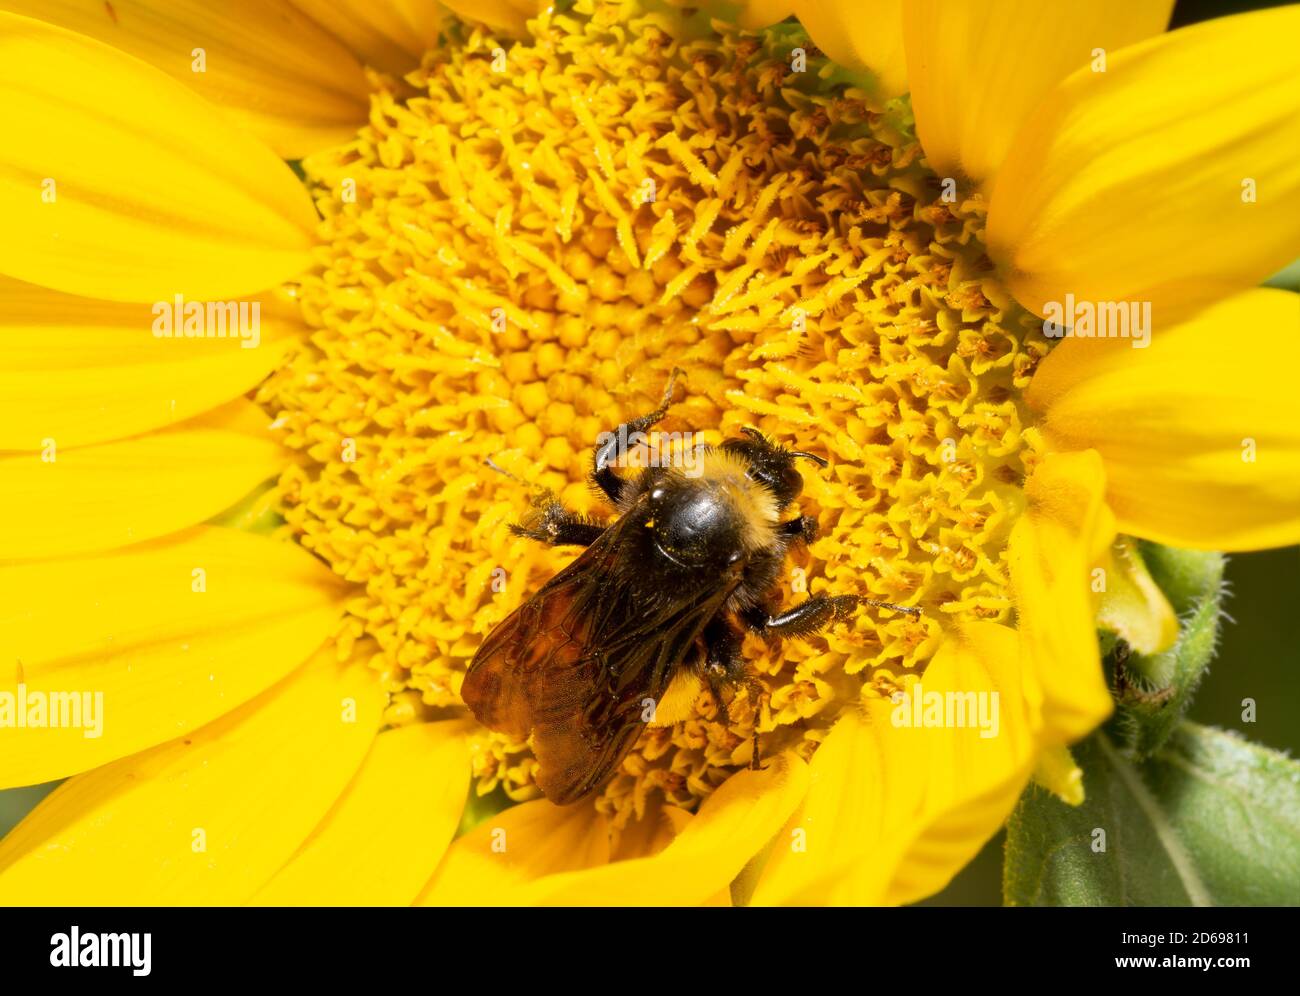 Closeup of a Bumble Bee pollinating a freshly opened Sunflower Stock Photo